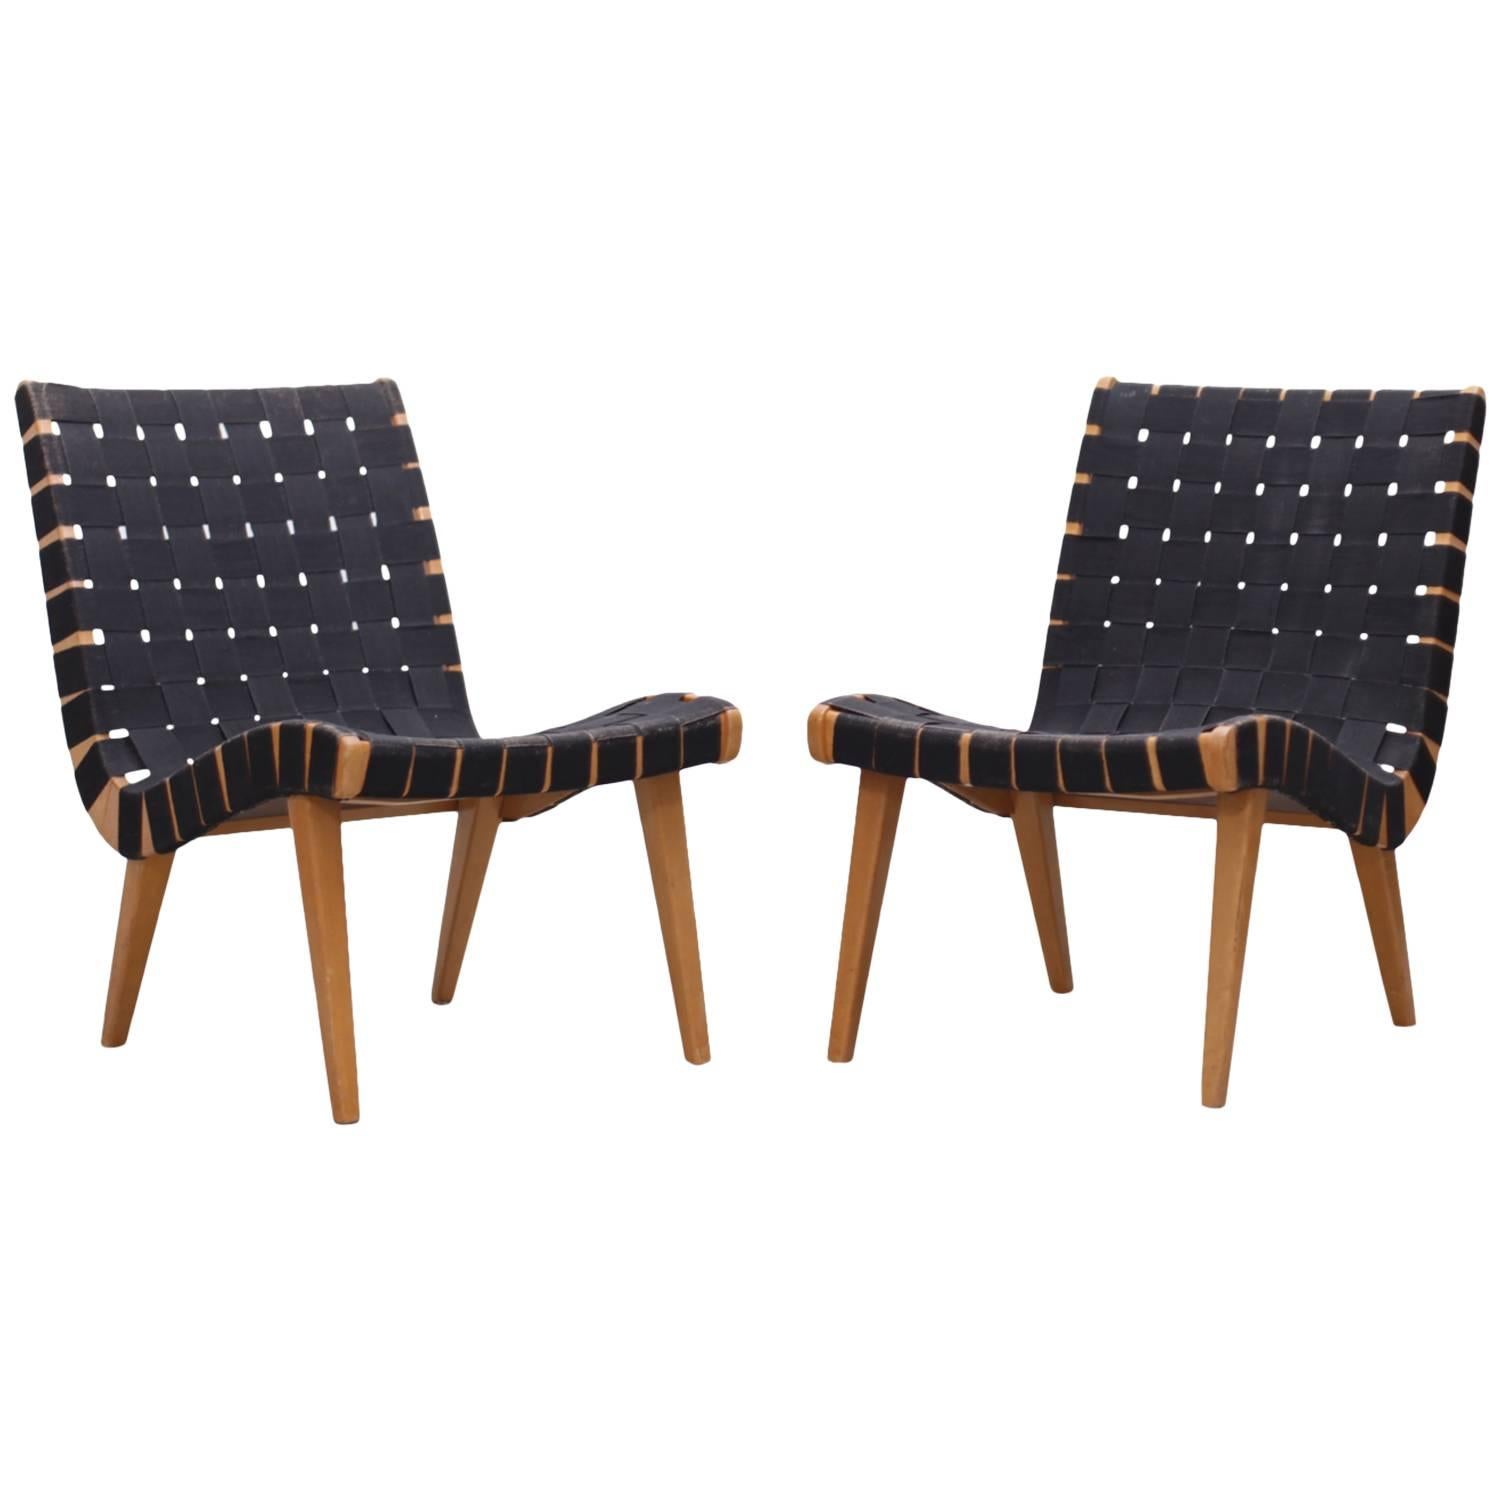 Pair of Matched Jens Risom Lounge Chairs in Black Webbing for Knoll